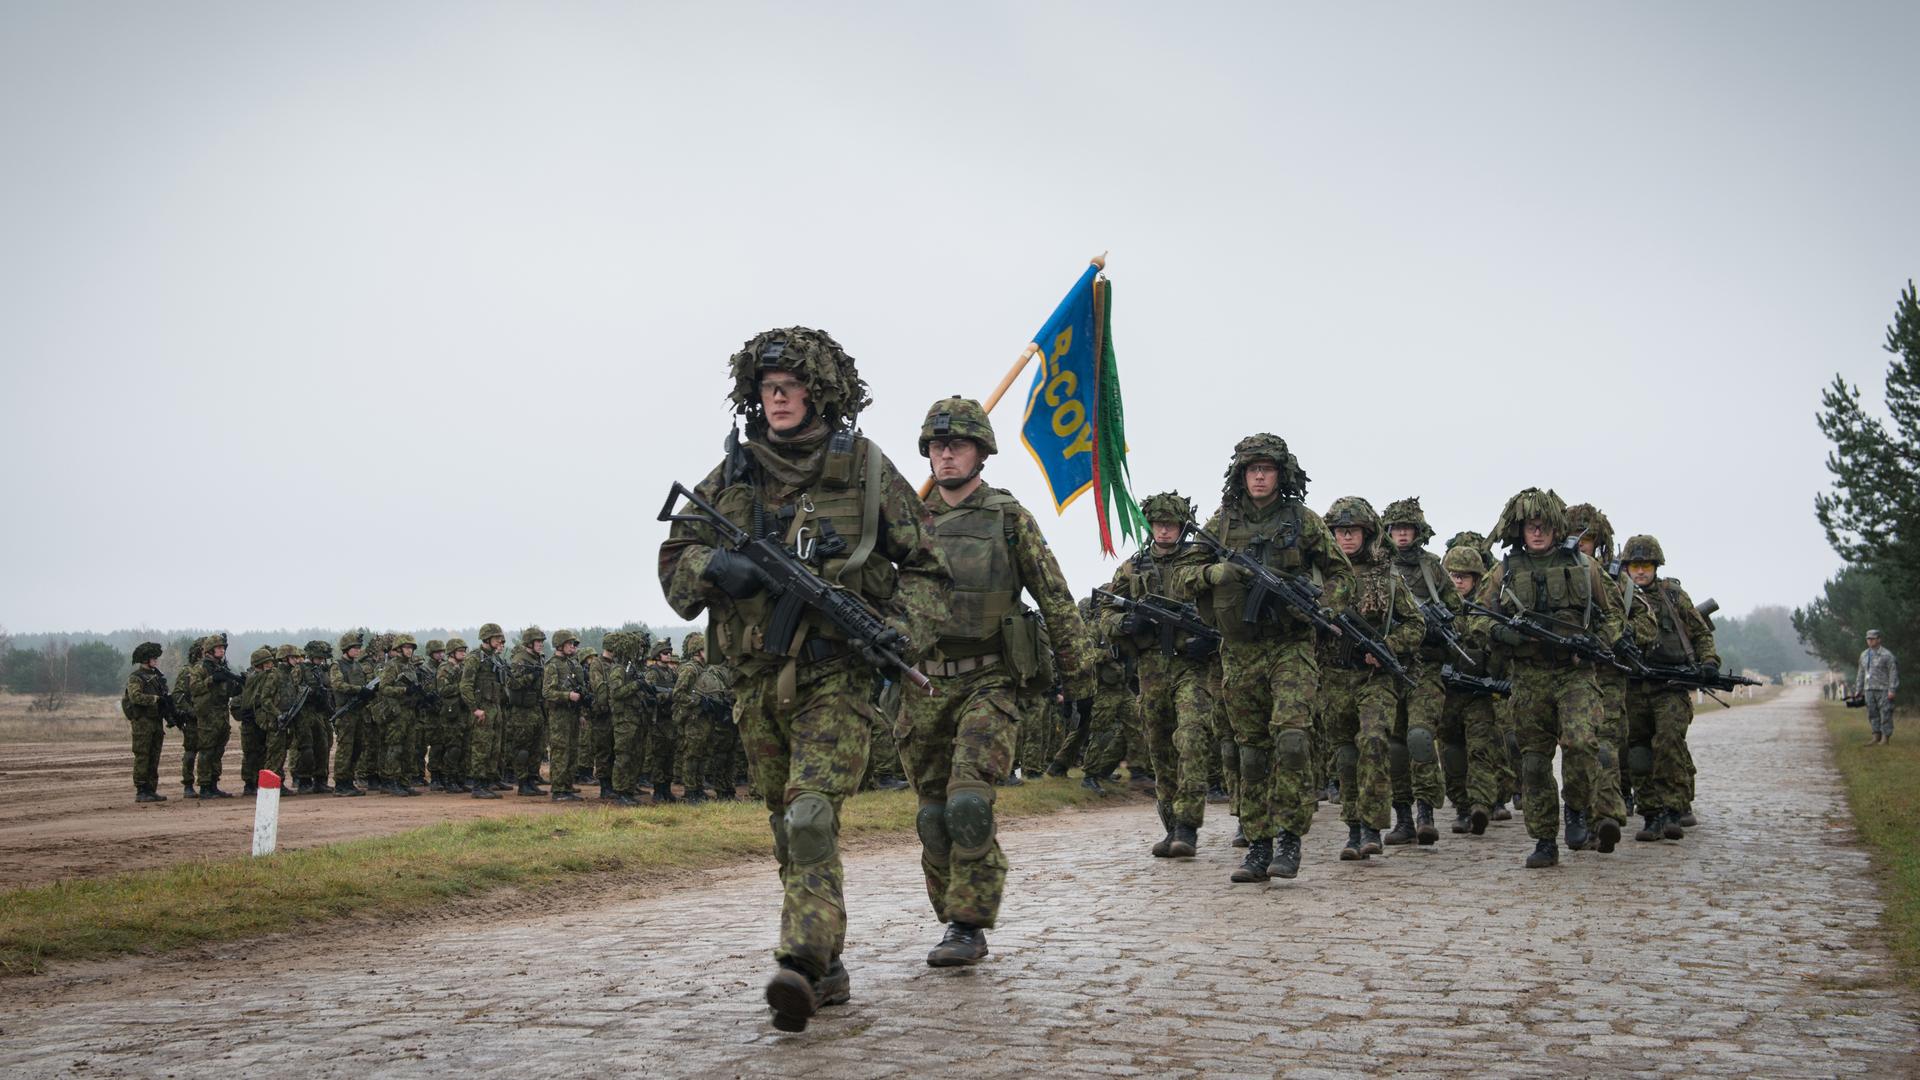 Estonian troops during a NATO exercise in Poland last year.